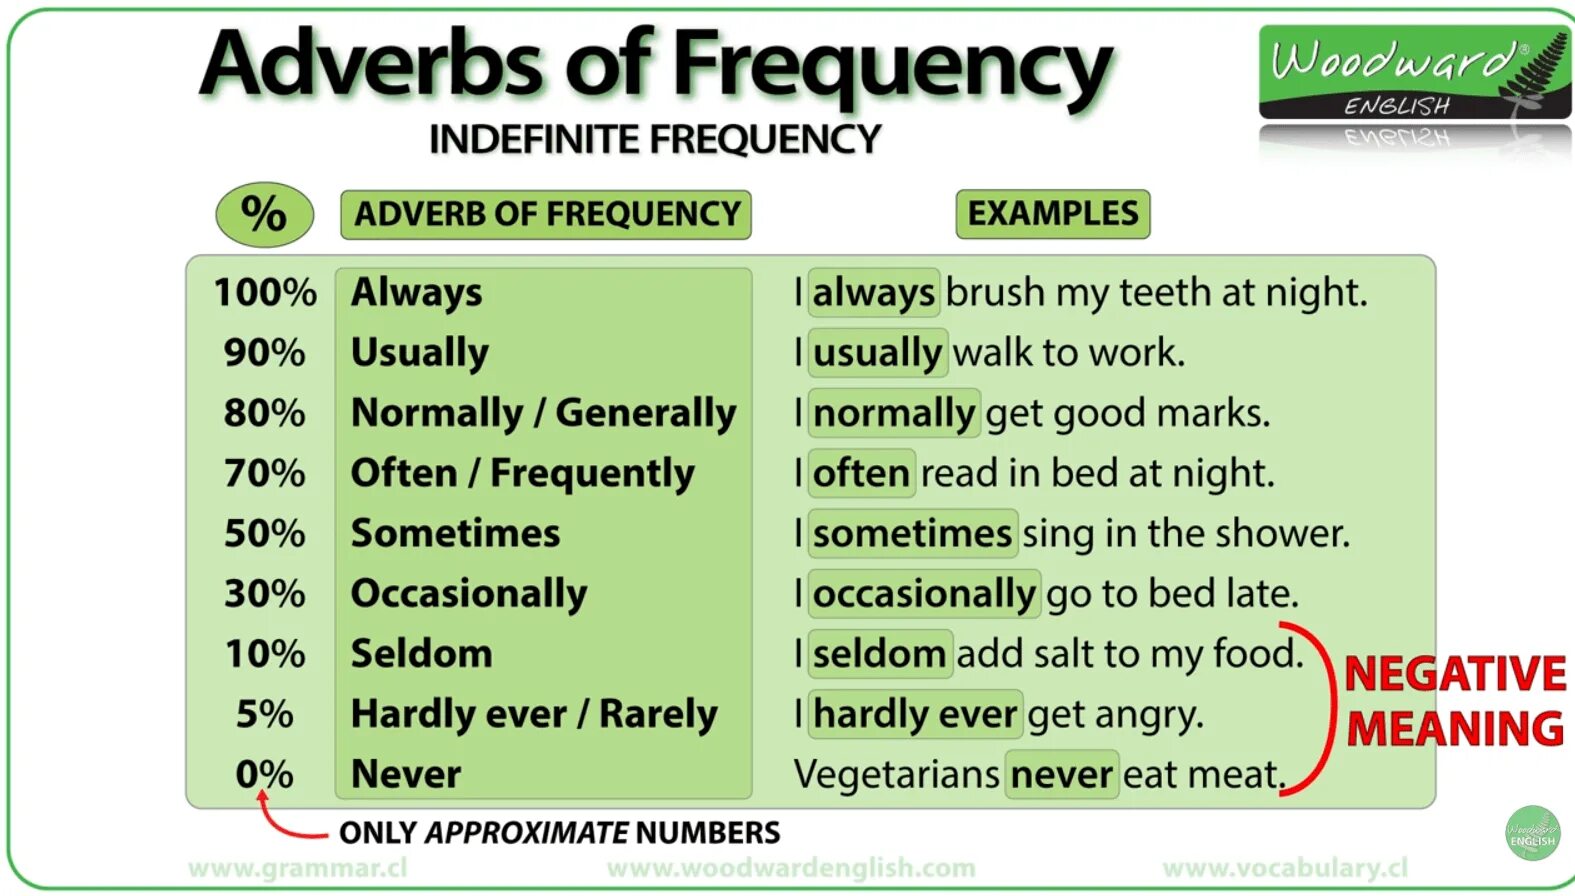 Adverbs of Frequency. Adverbs of Frequency in English. Adverbs and expressions of Frequency правило. Frequency adverbs грамматика. Adverbs of frequency in the sentence